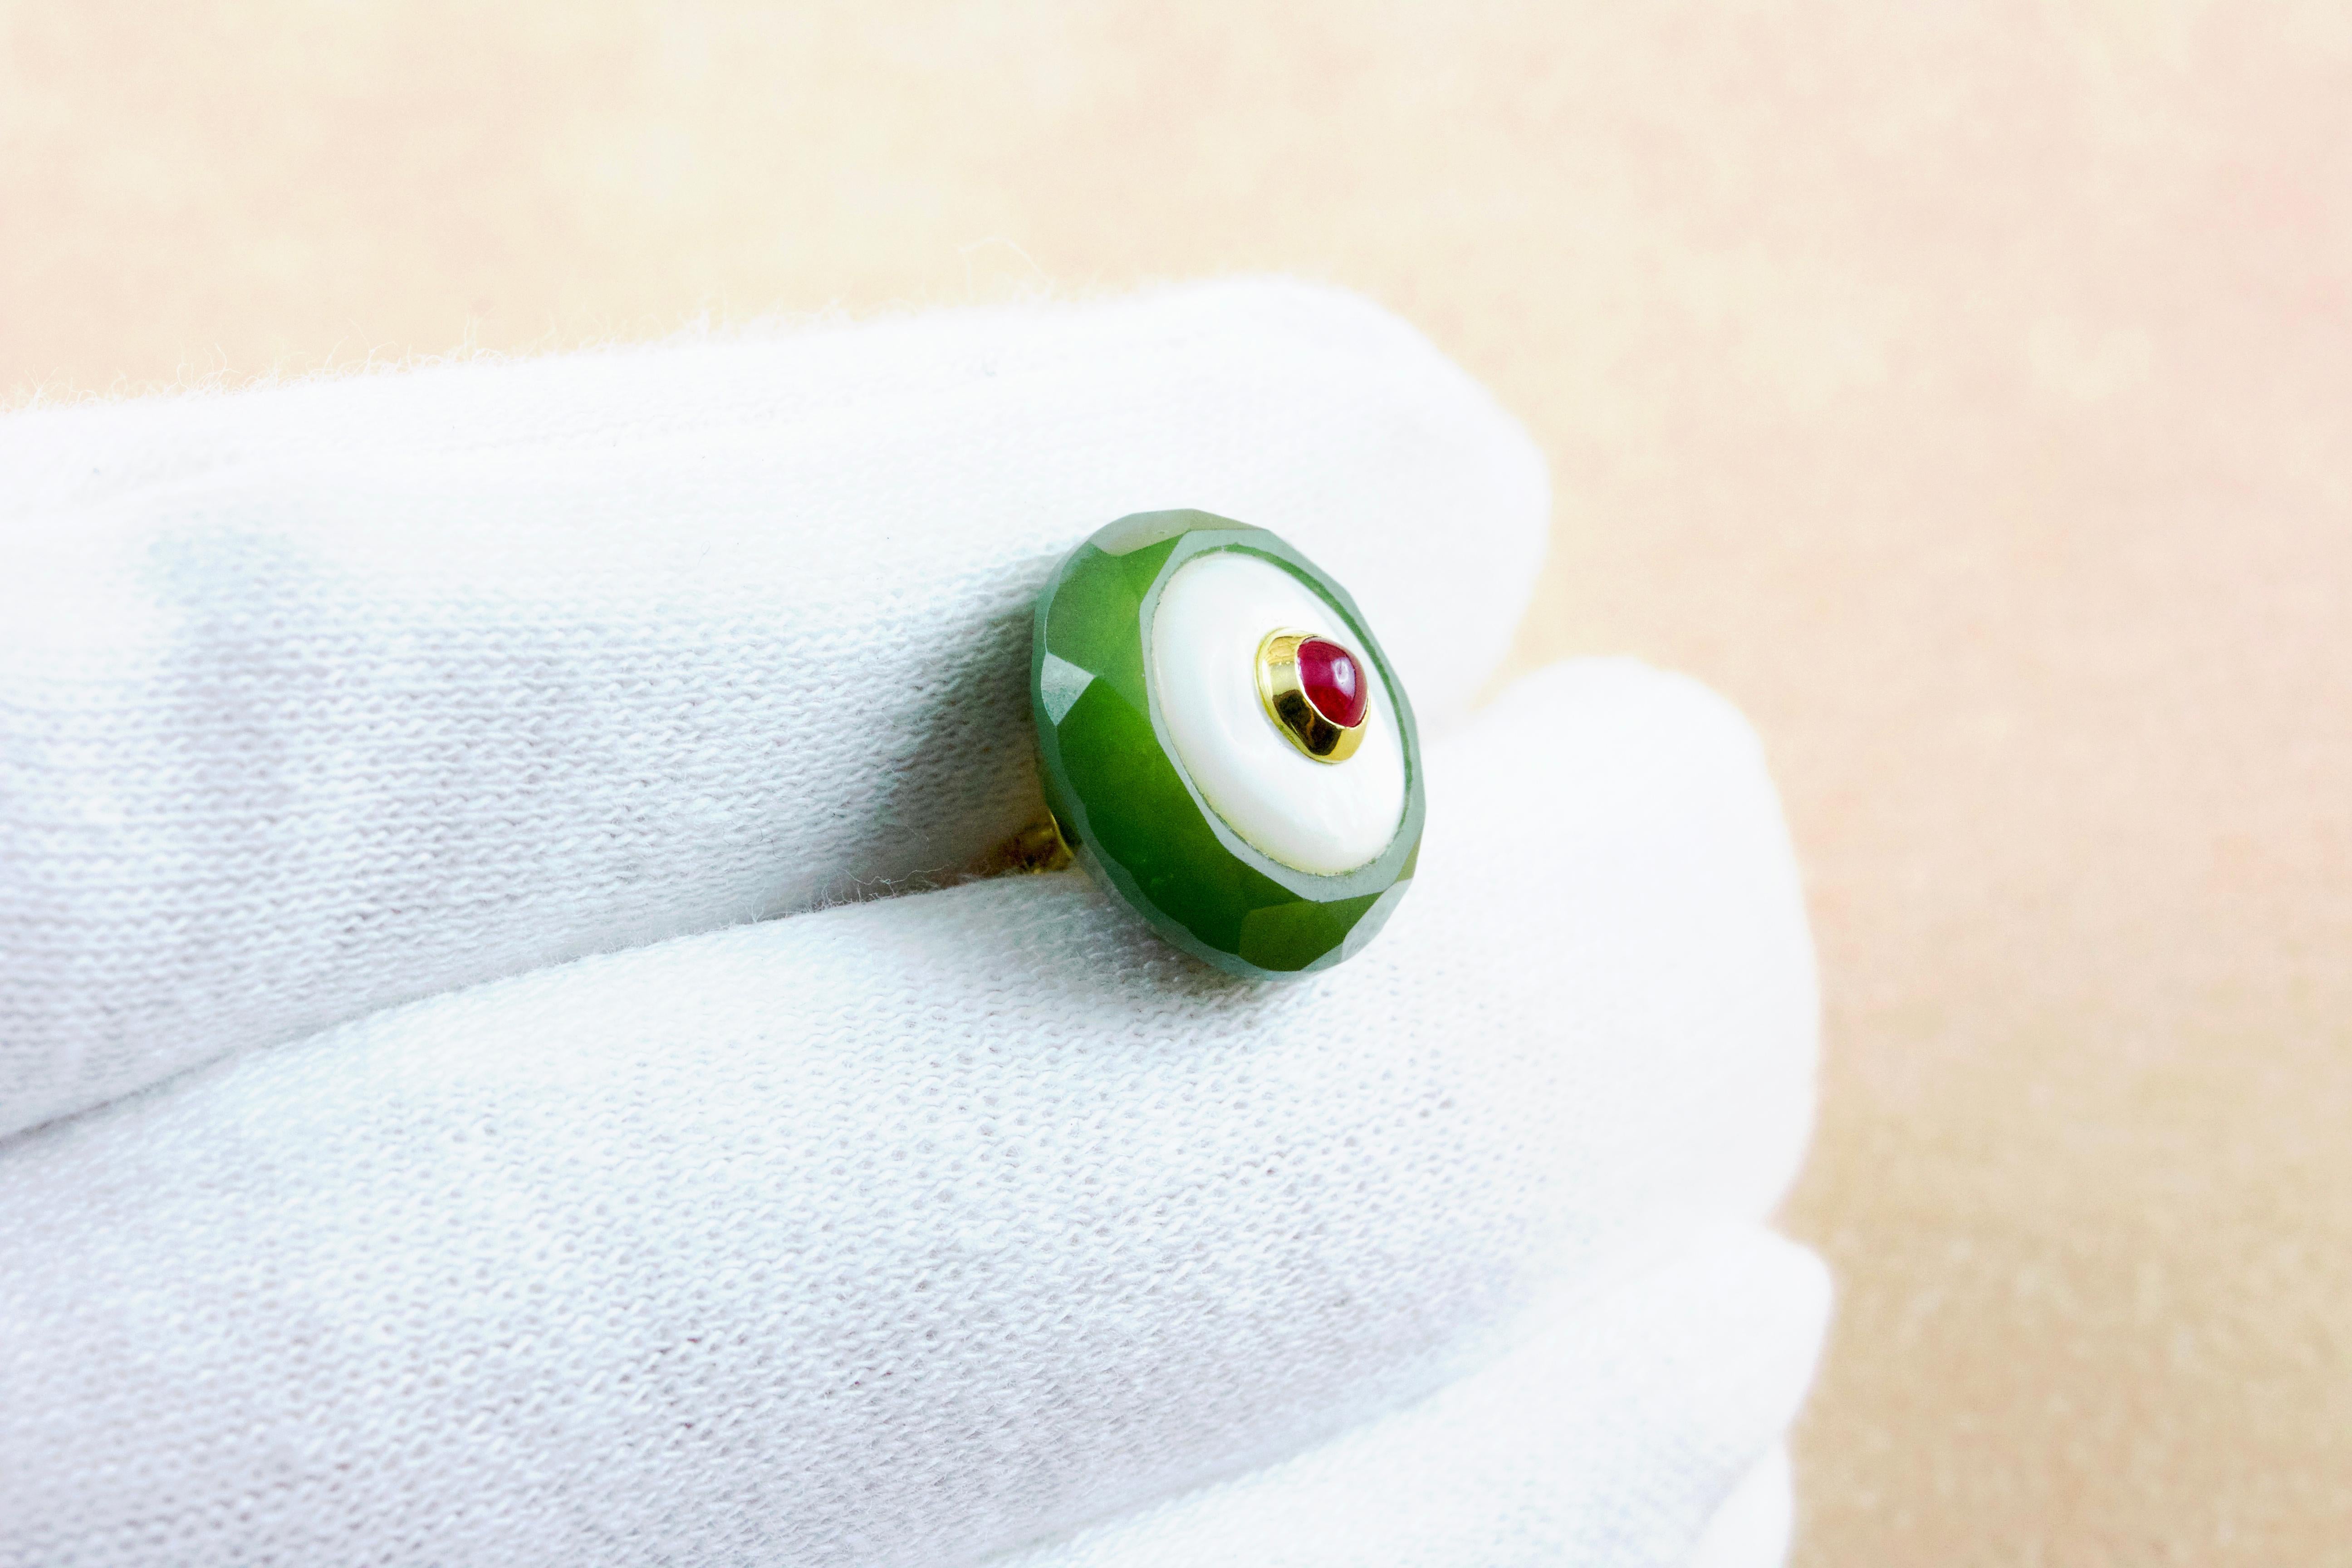 These exquisite cufflinks feature a round shape for front face and a delicate color palette, thanks to the warm green of the jade and the iridescent transparency of the mother of pearl. 
The center of each element is adorned with a cabochon ruby